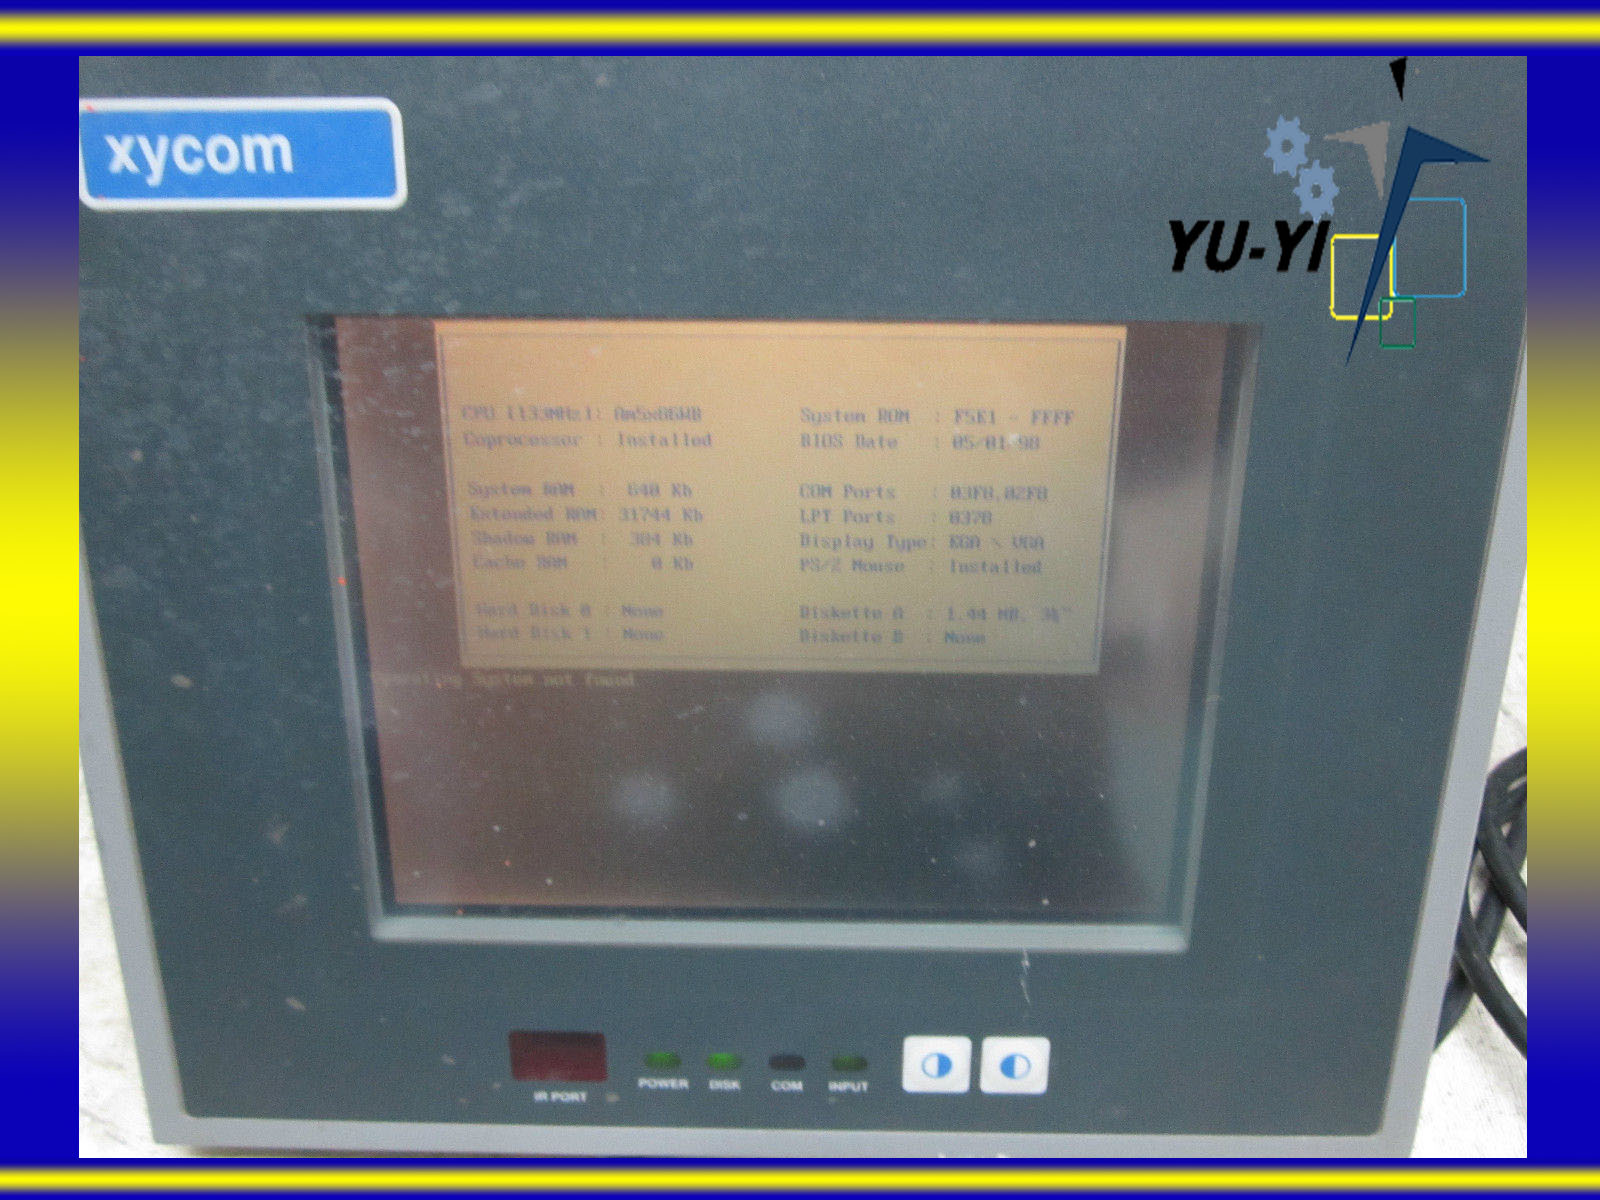 Xycom 9400 T Touch Screen Panel PN 9400-0004020012002 5133324-STN-A